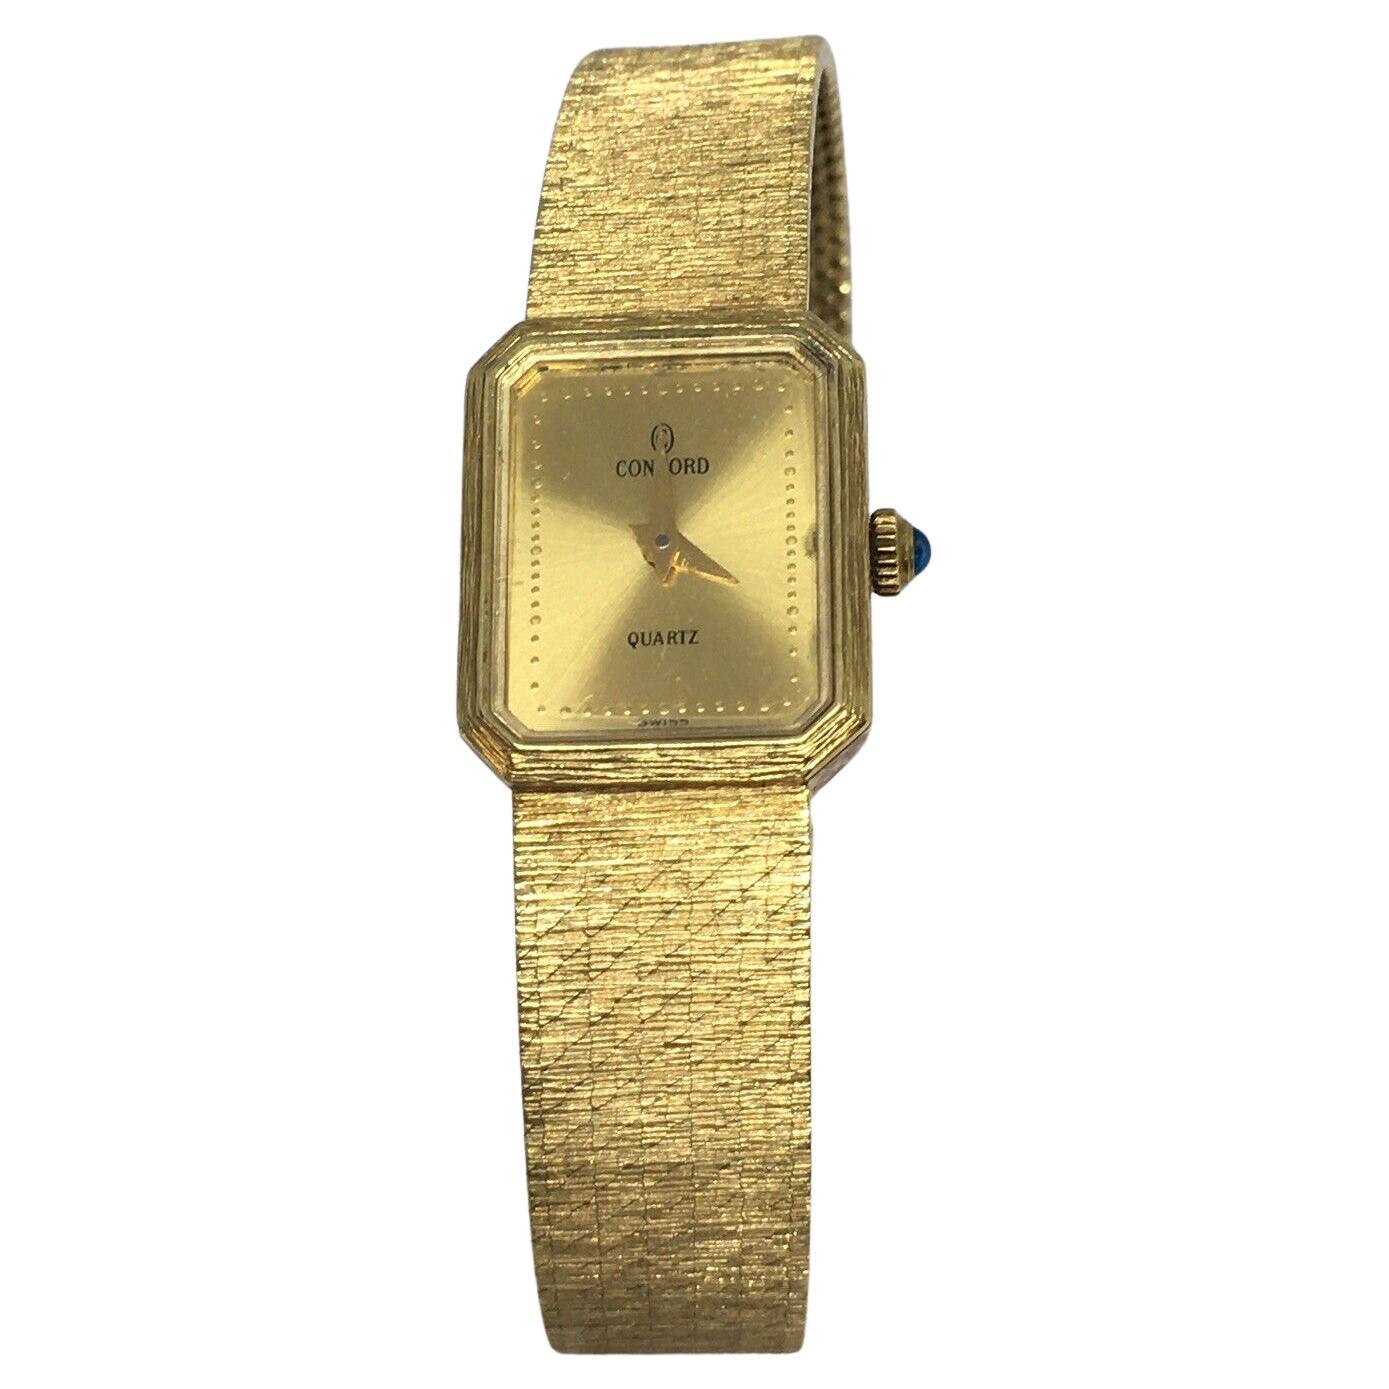 Lady's 14K Yellow Solid Gold Concord quartz Watch Factory Marked Case 6 inch